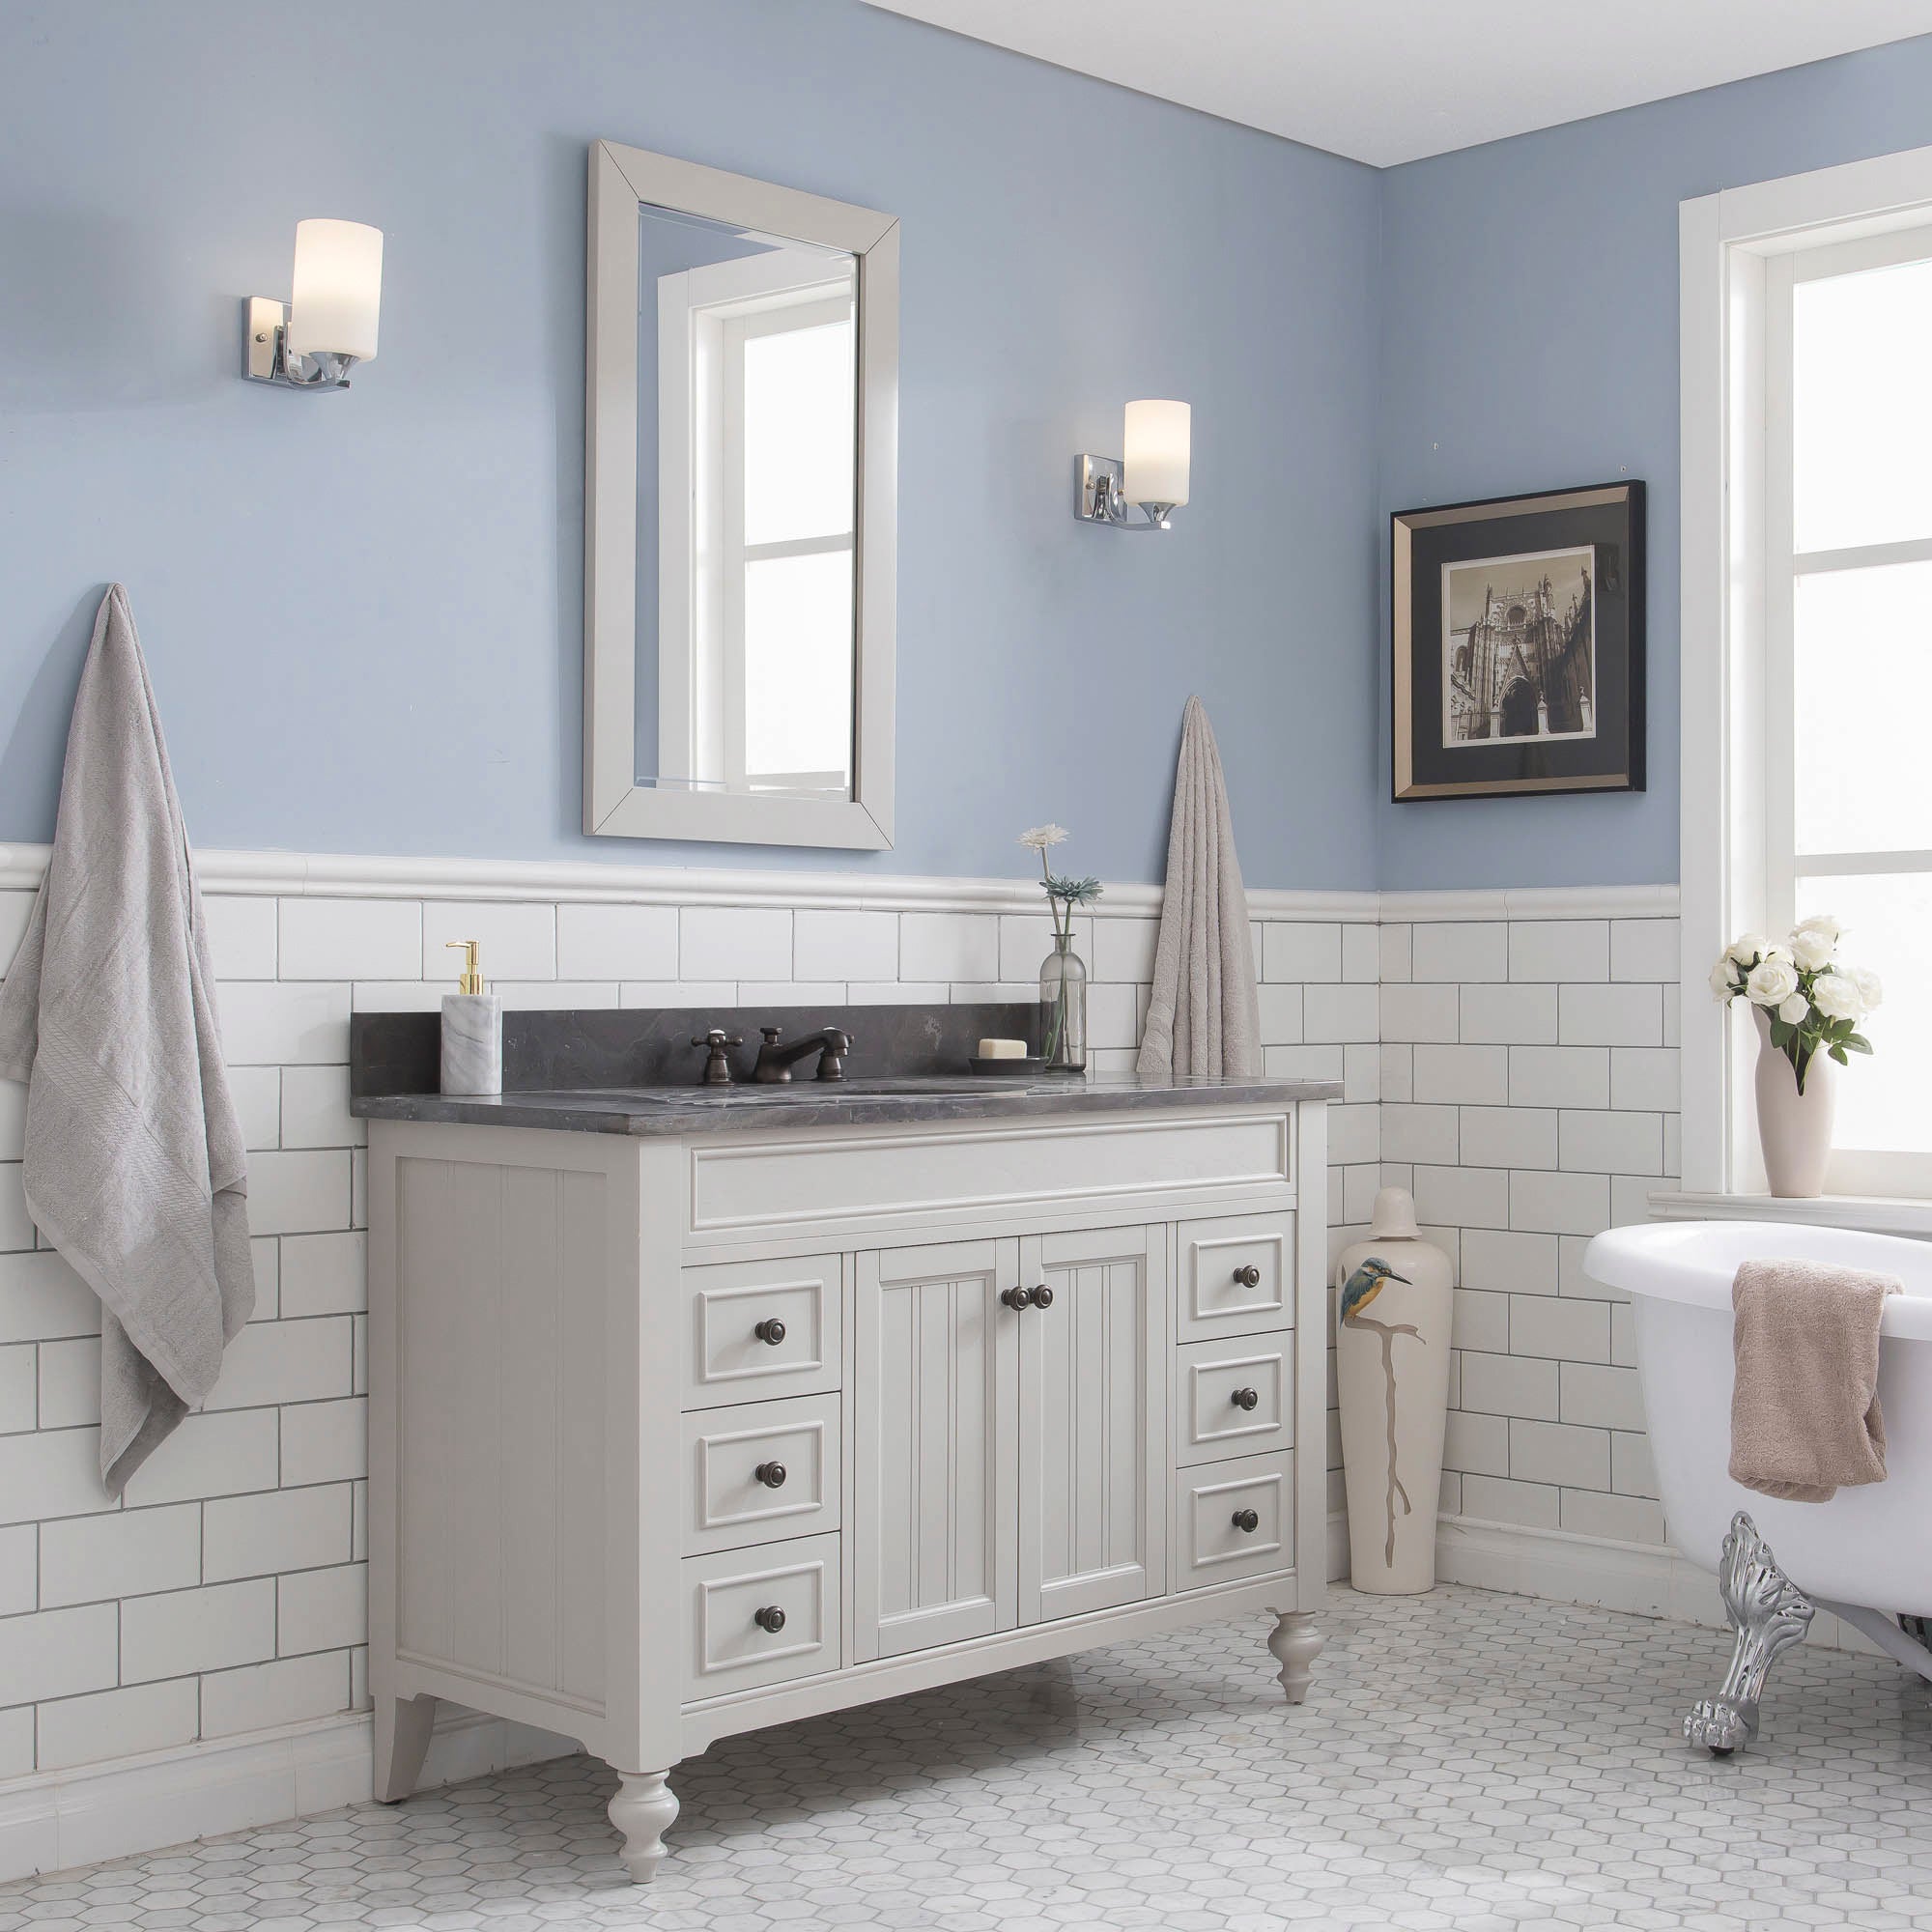 Water Creation | 48 Inch Earl Grey Single Sink Bathroom Vanity From The Potenza Collection | PO48BL03EG-000000000